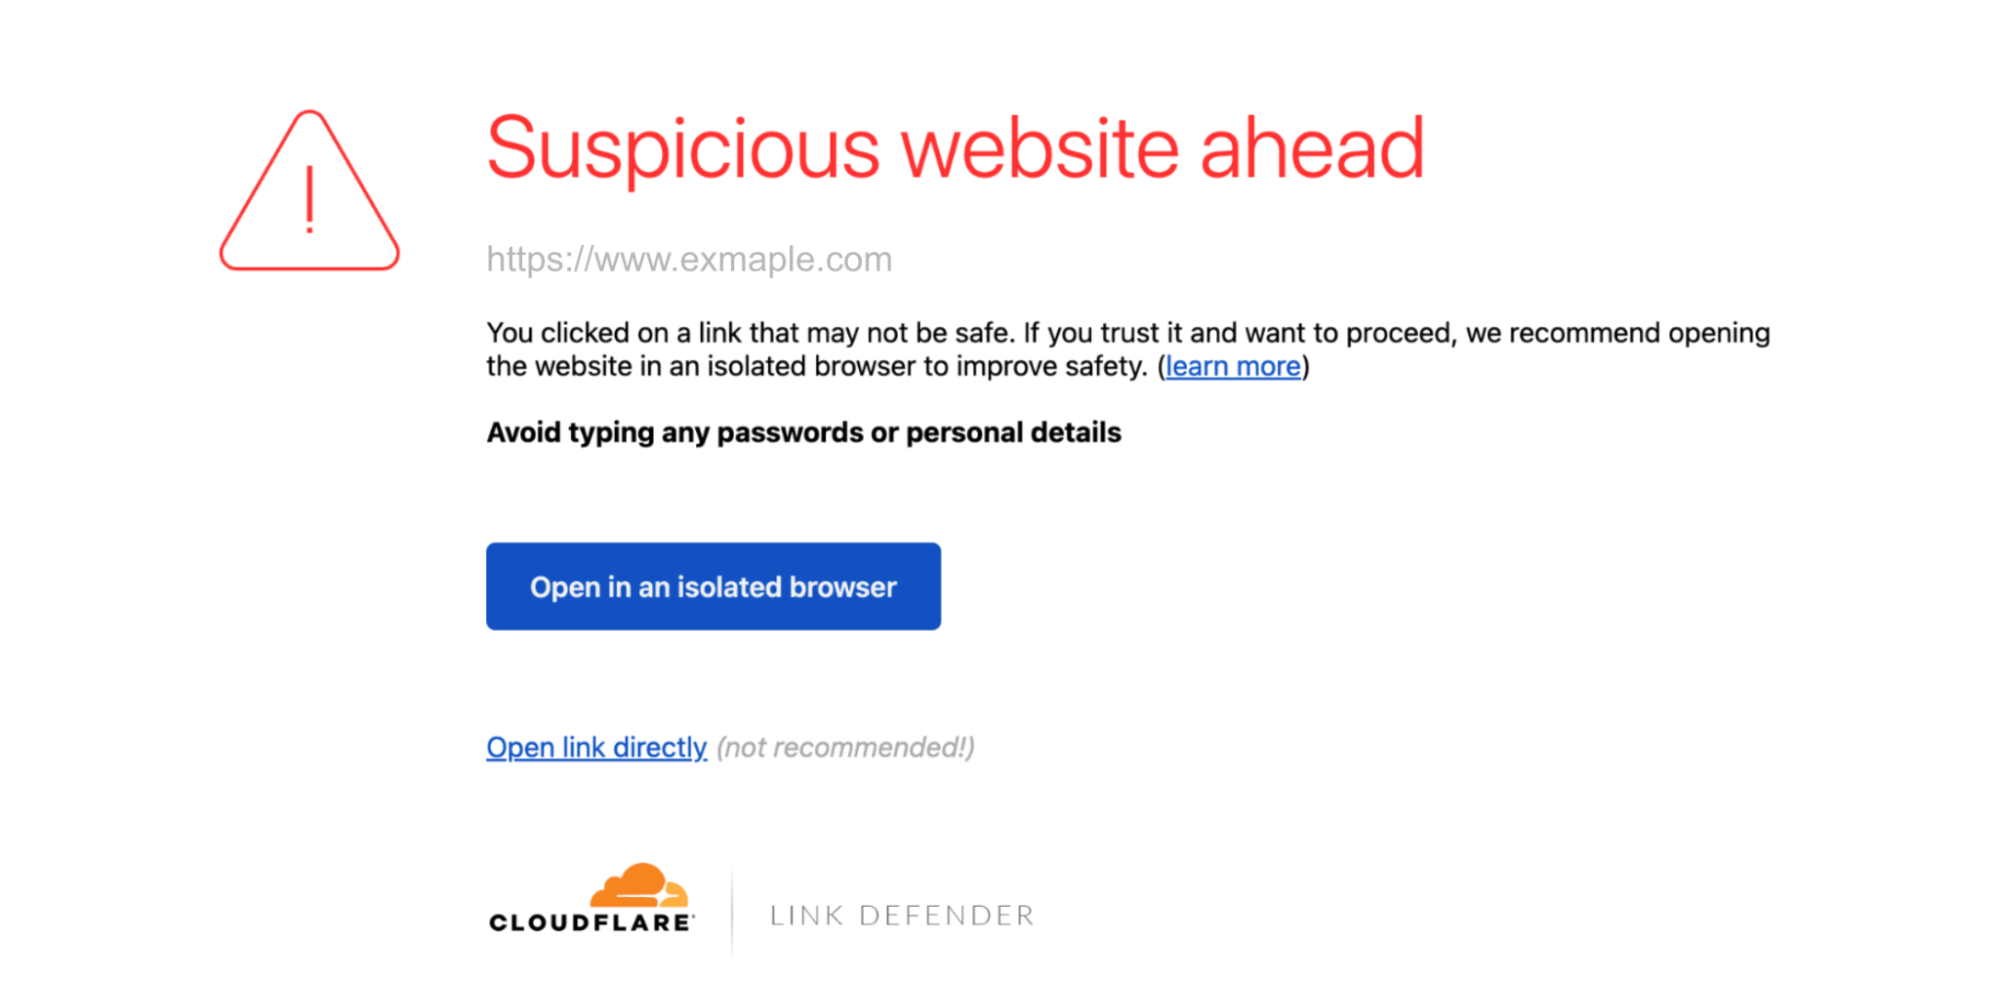 Interstitial page informs the user that the website they’ll visit is potentially dangerous and provides a button to open with Cloudflare Browser Isolation